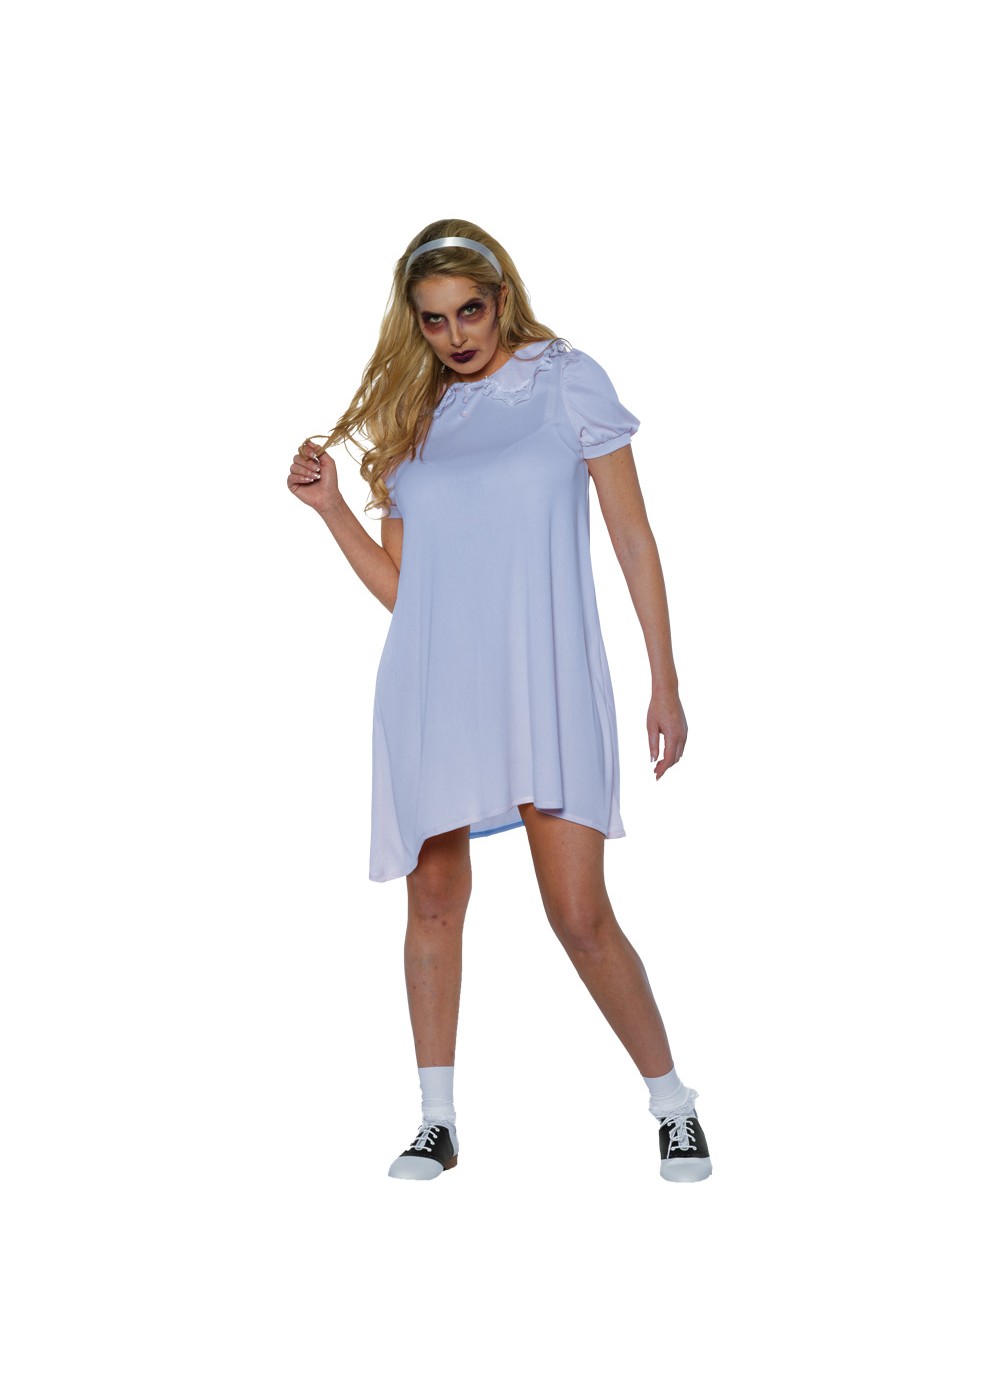 Womens Scary Girl Costume